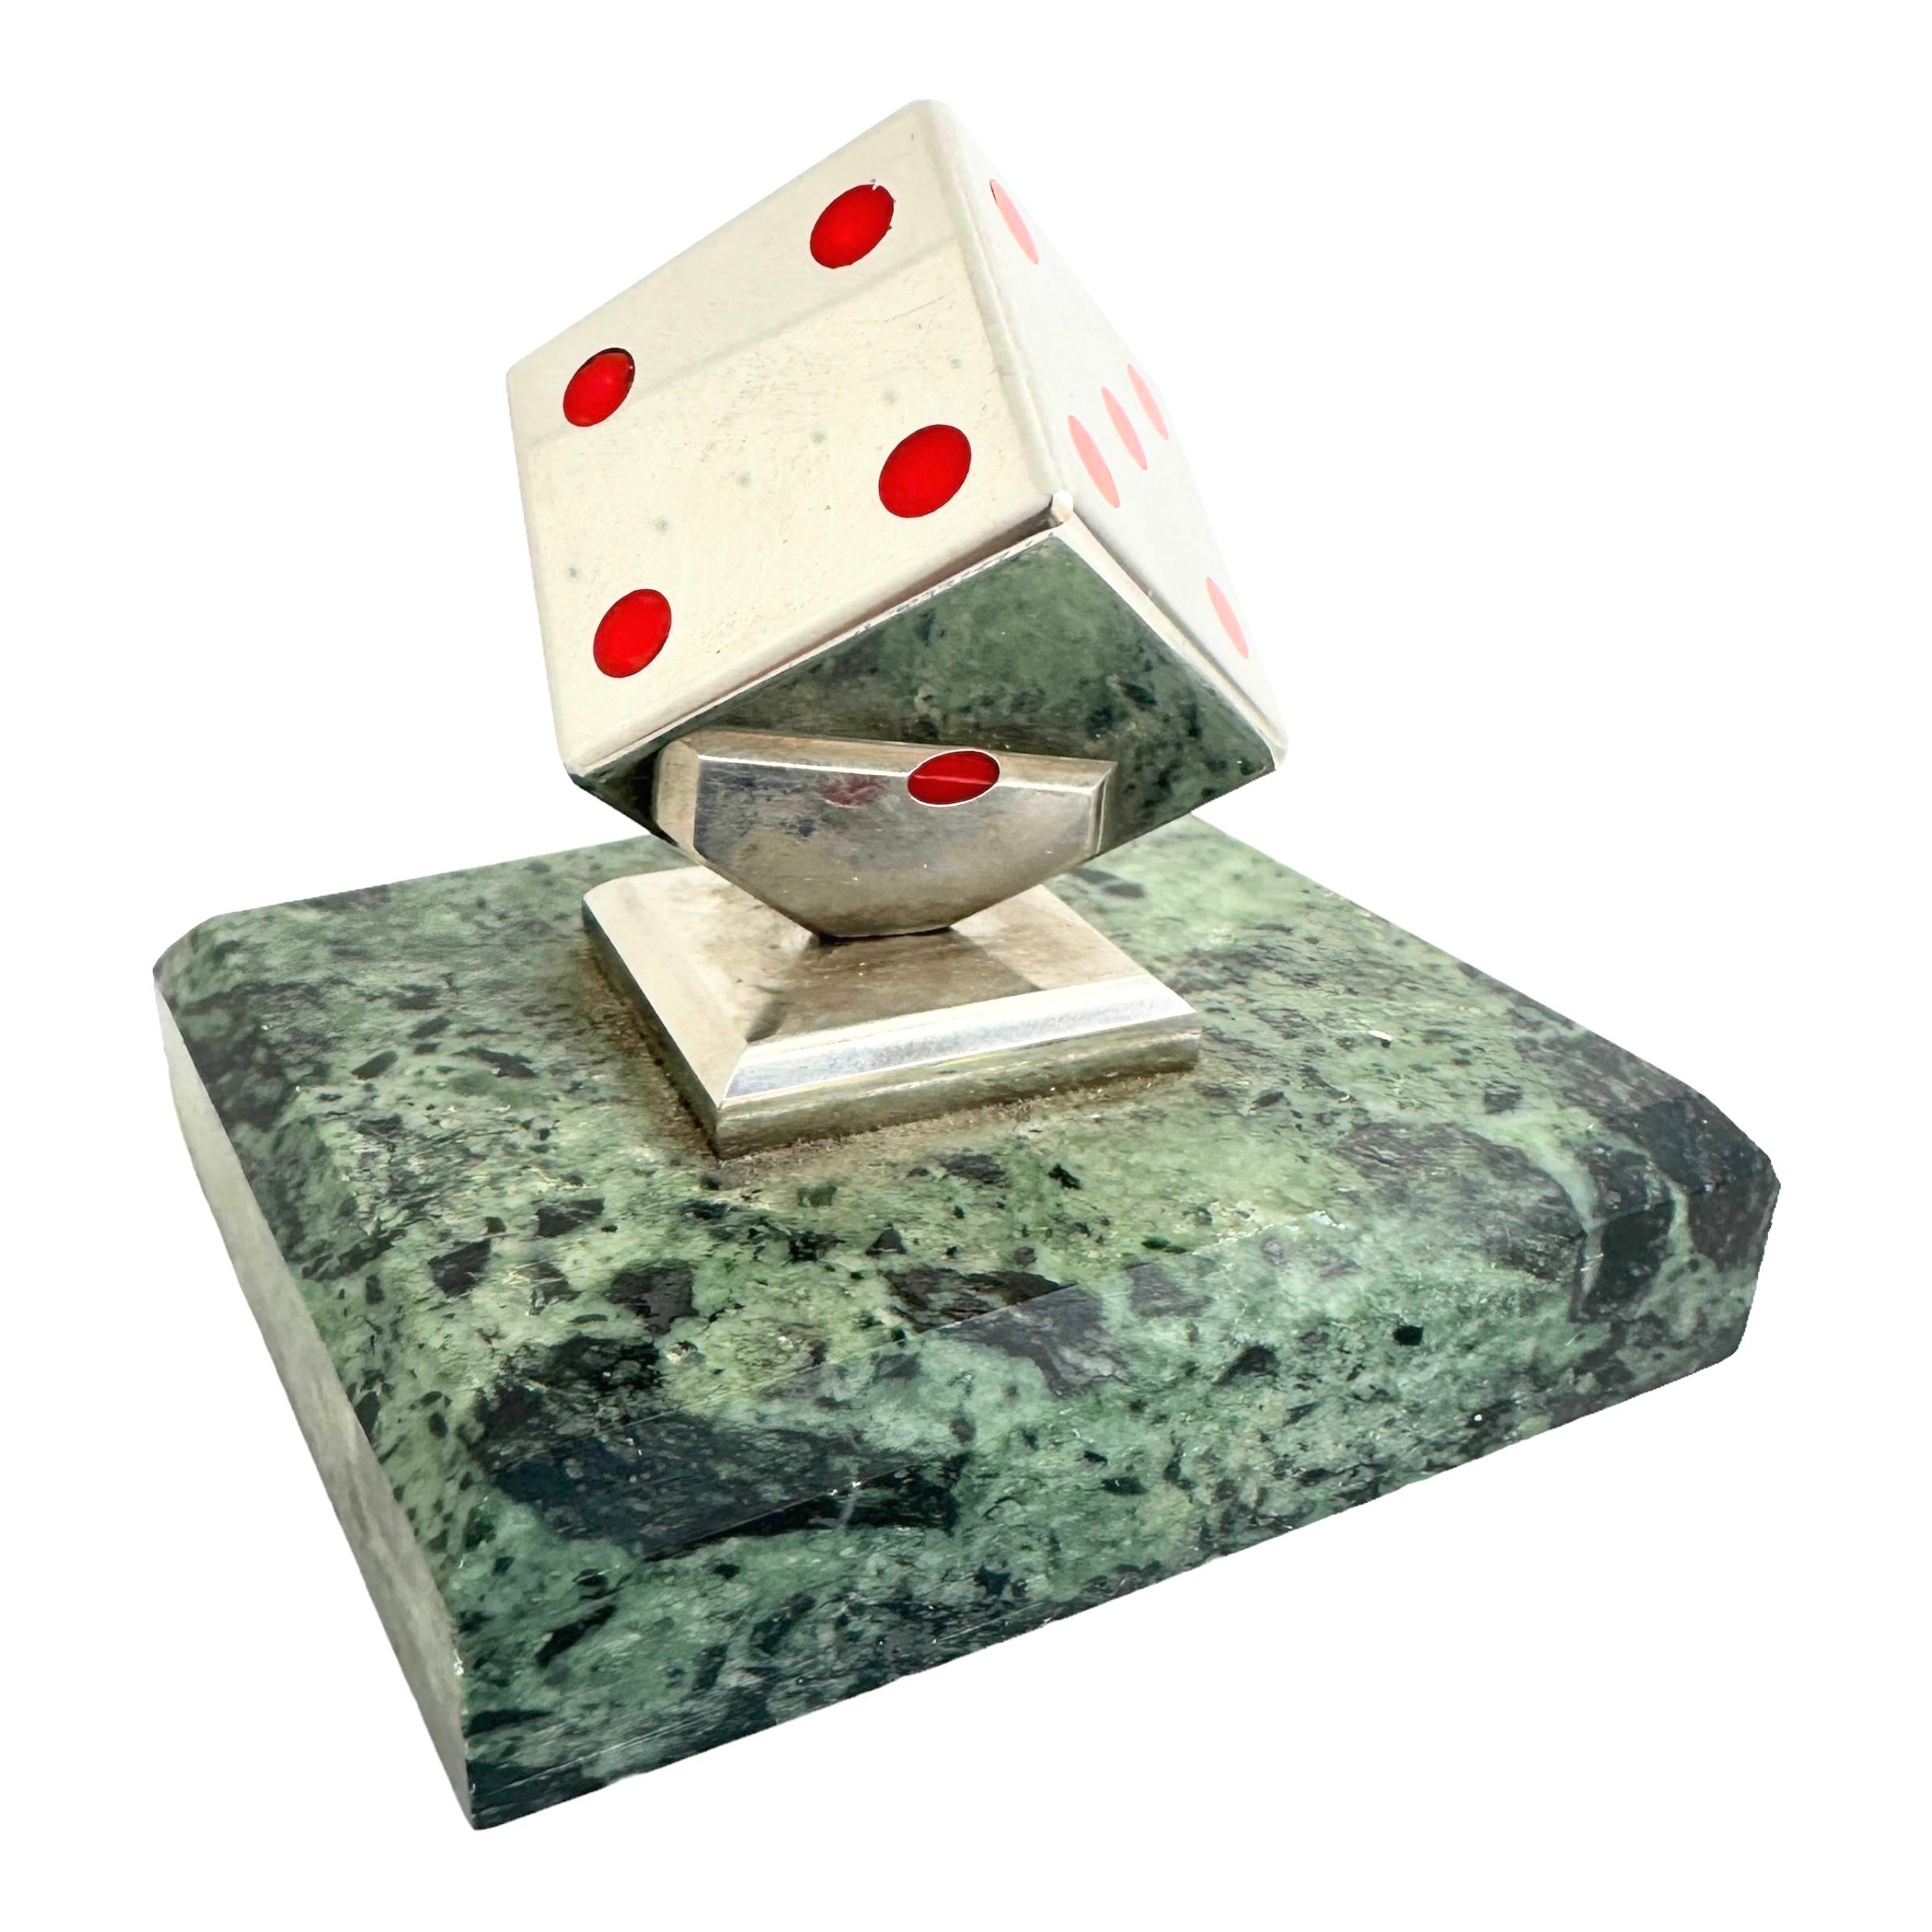 Hand-Crafted Dice Metal Statue on Marble Base Paper Weight Mid-Century Modern, German, 1970s For Sale